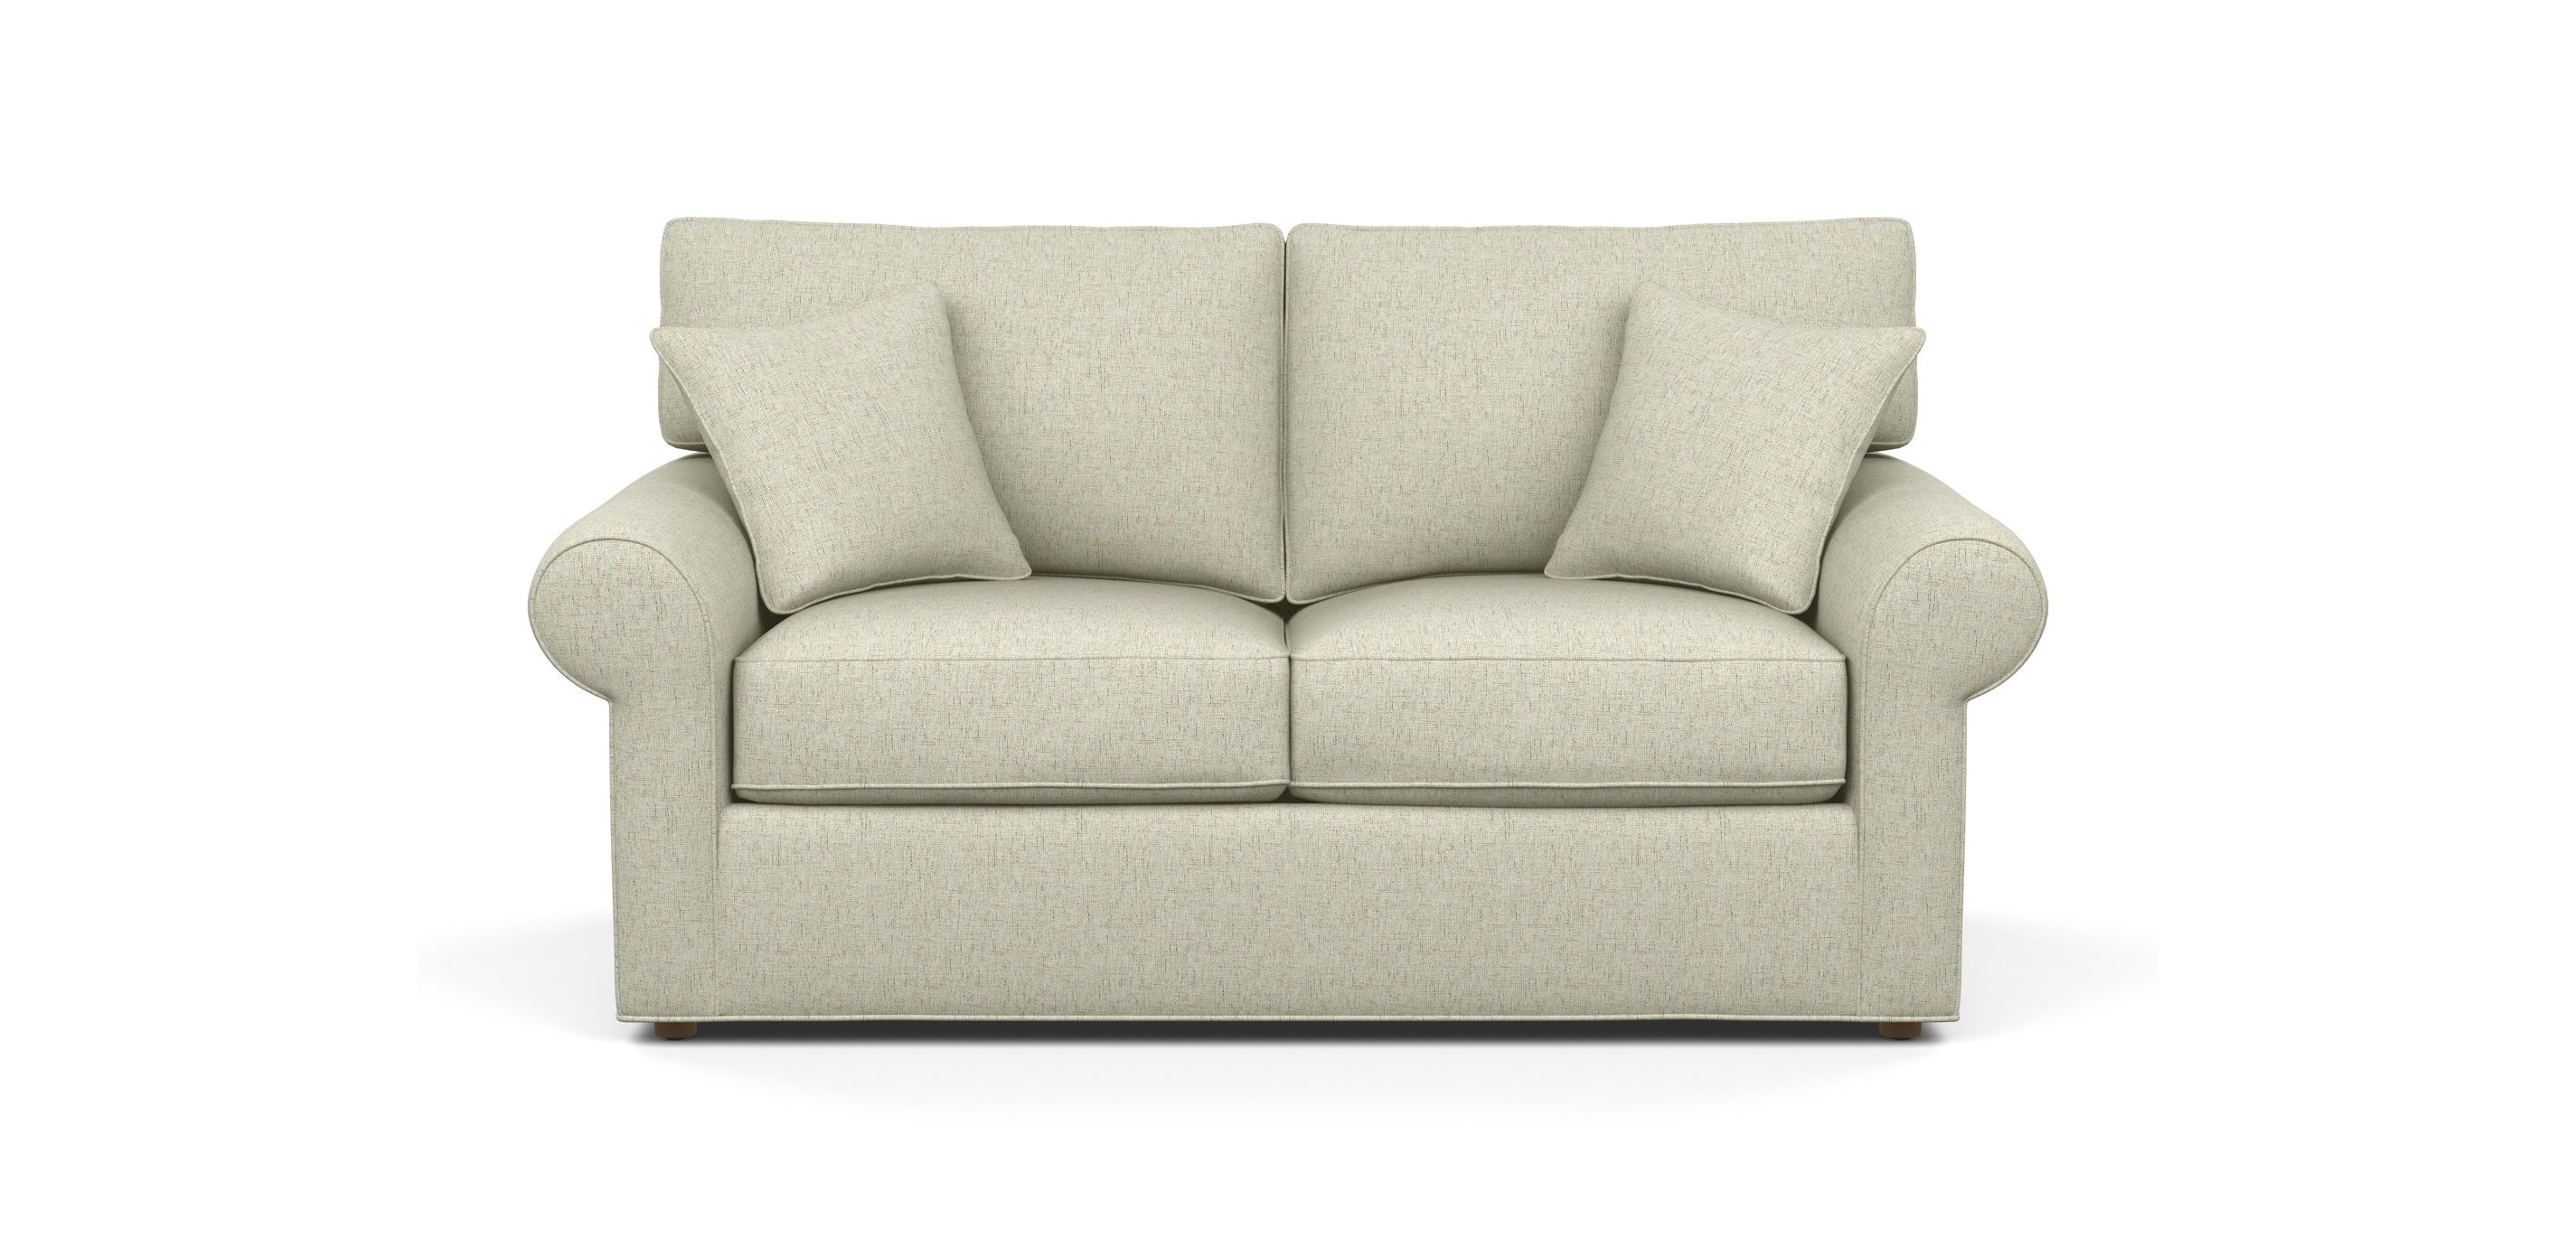 Retreat Roll Arm Sofa | Sofas & Loveseats | Ethan Allen With Regard To Sofas With Rolled Arm (Gallery 8 of 20)